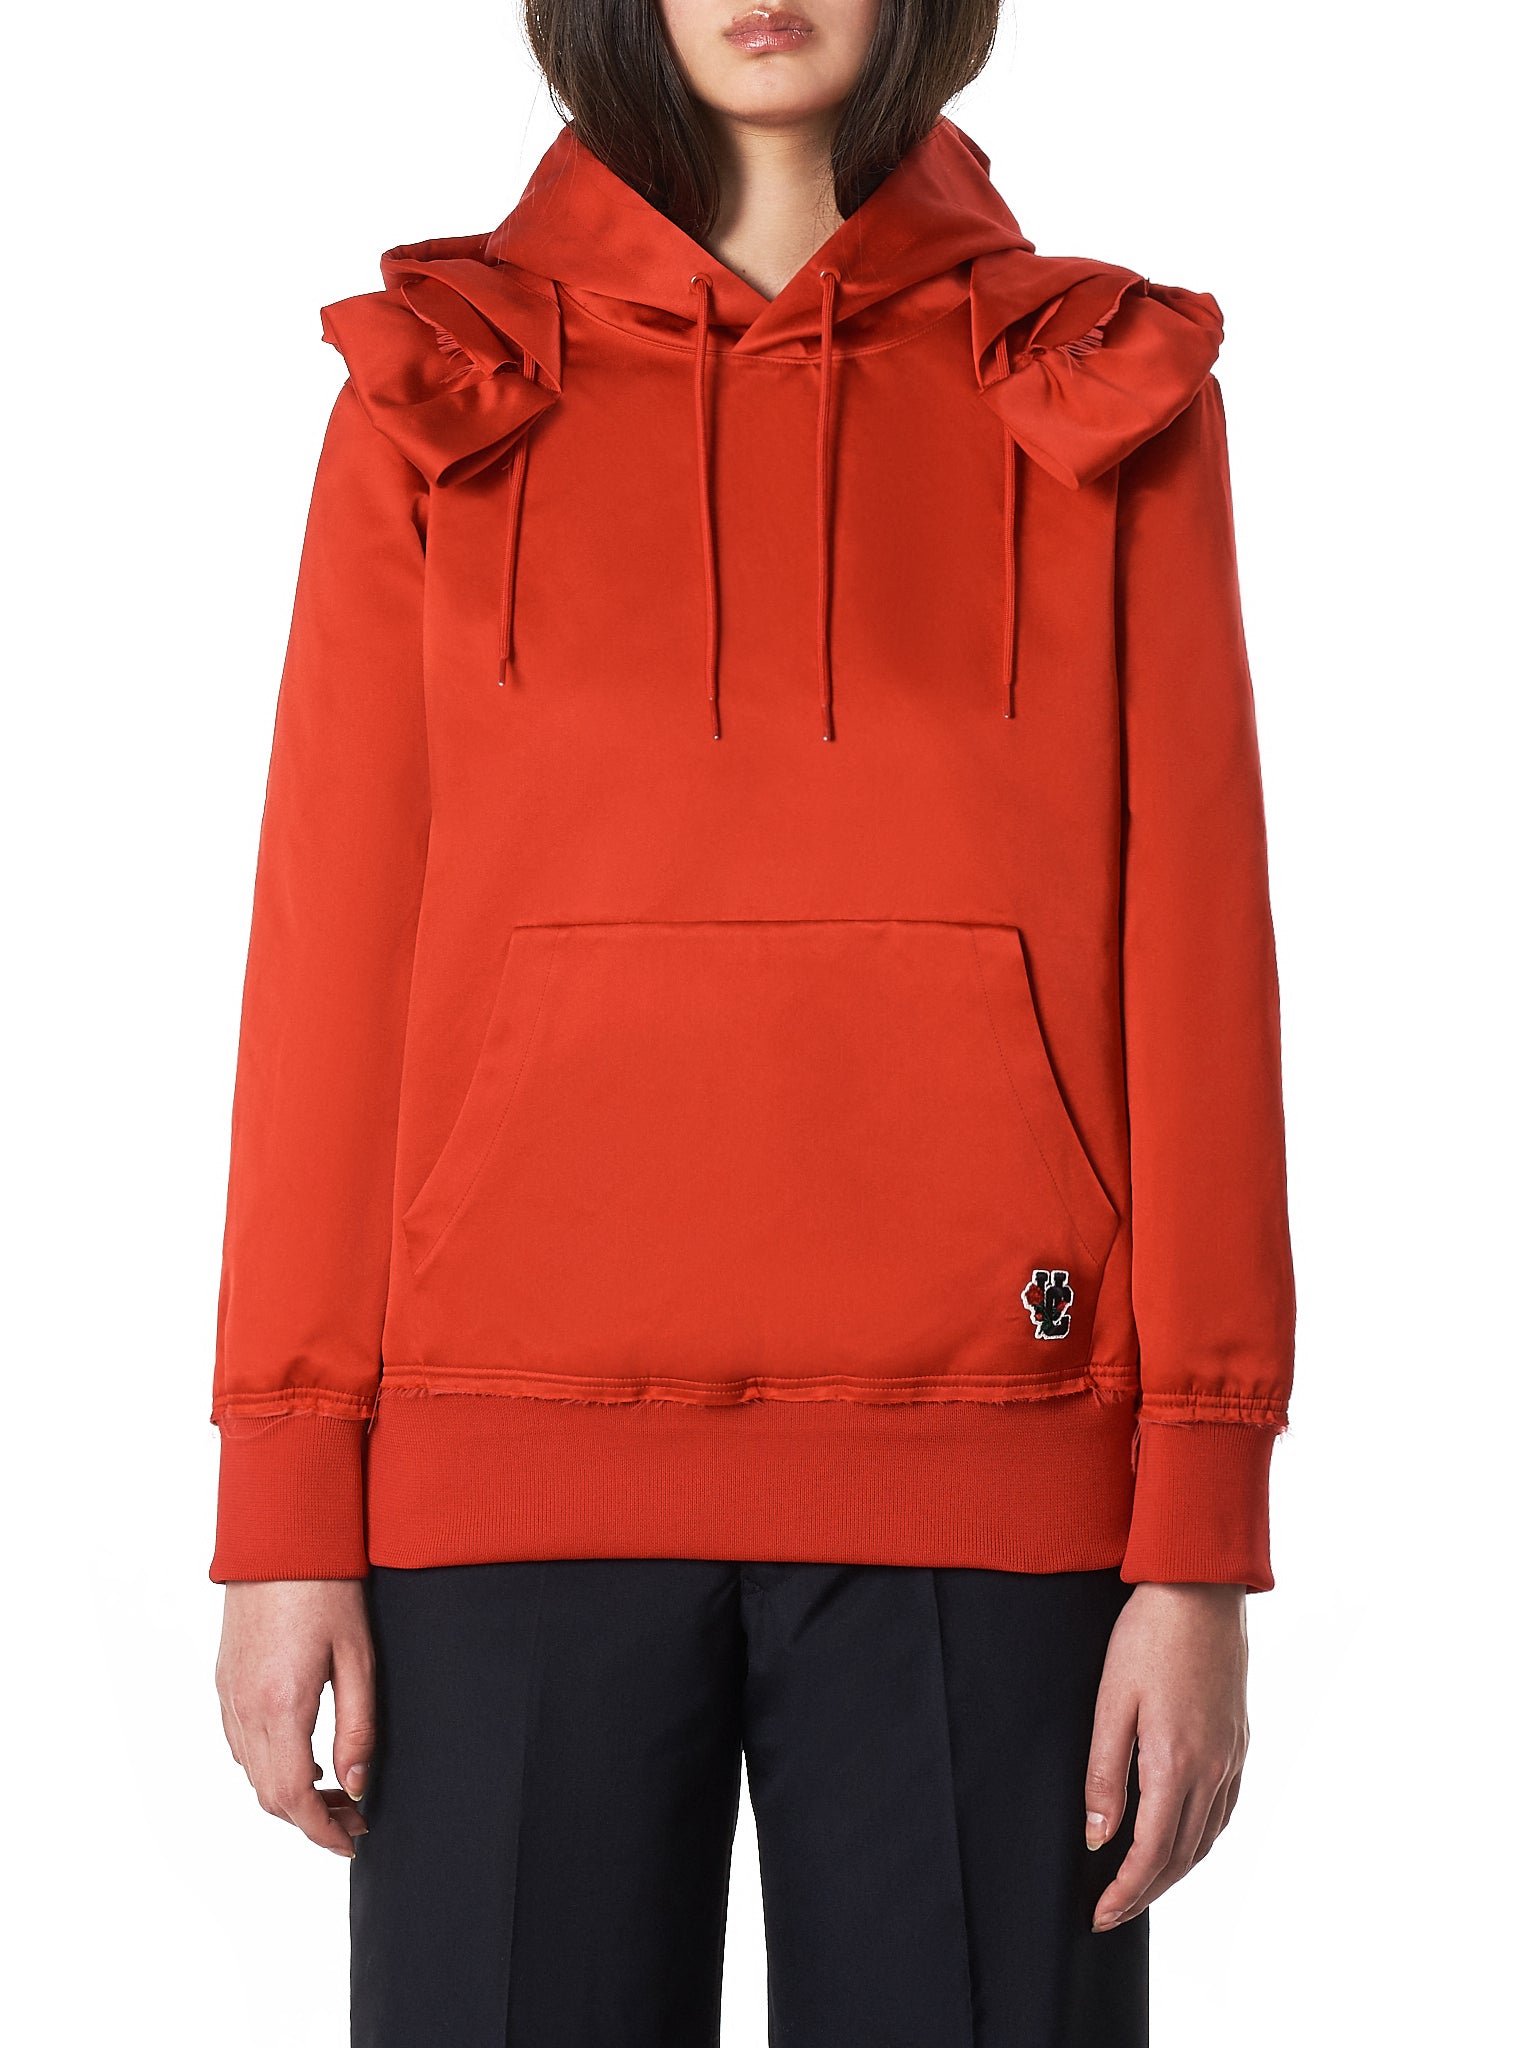 Undercover Silk Hoodie - Hlorenzo Front